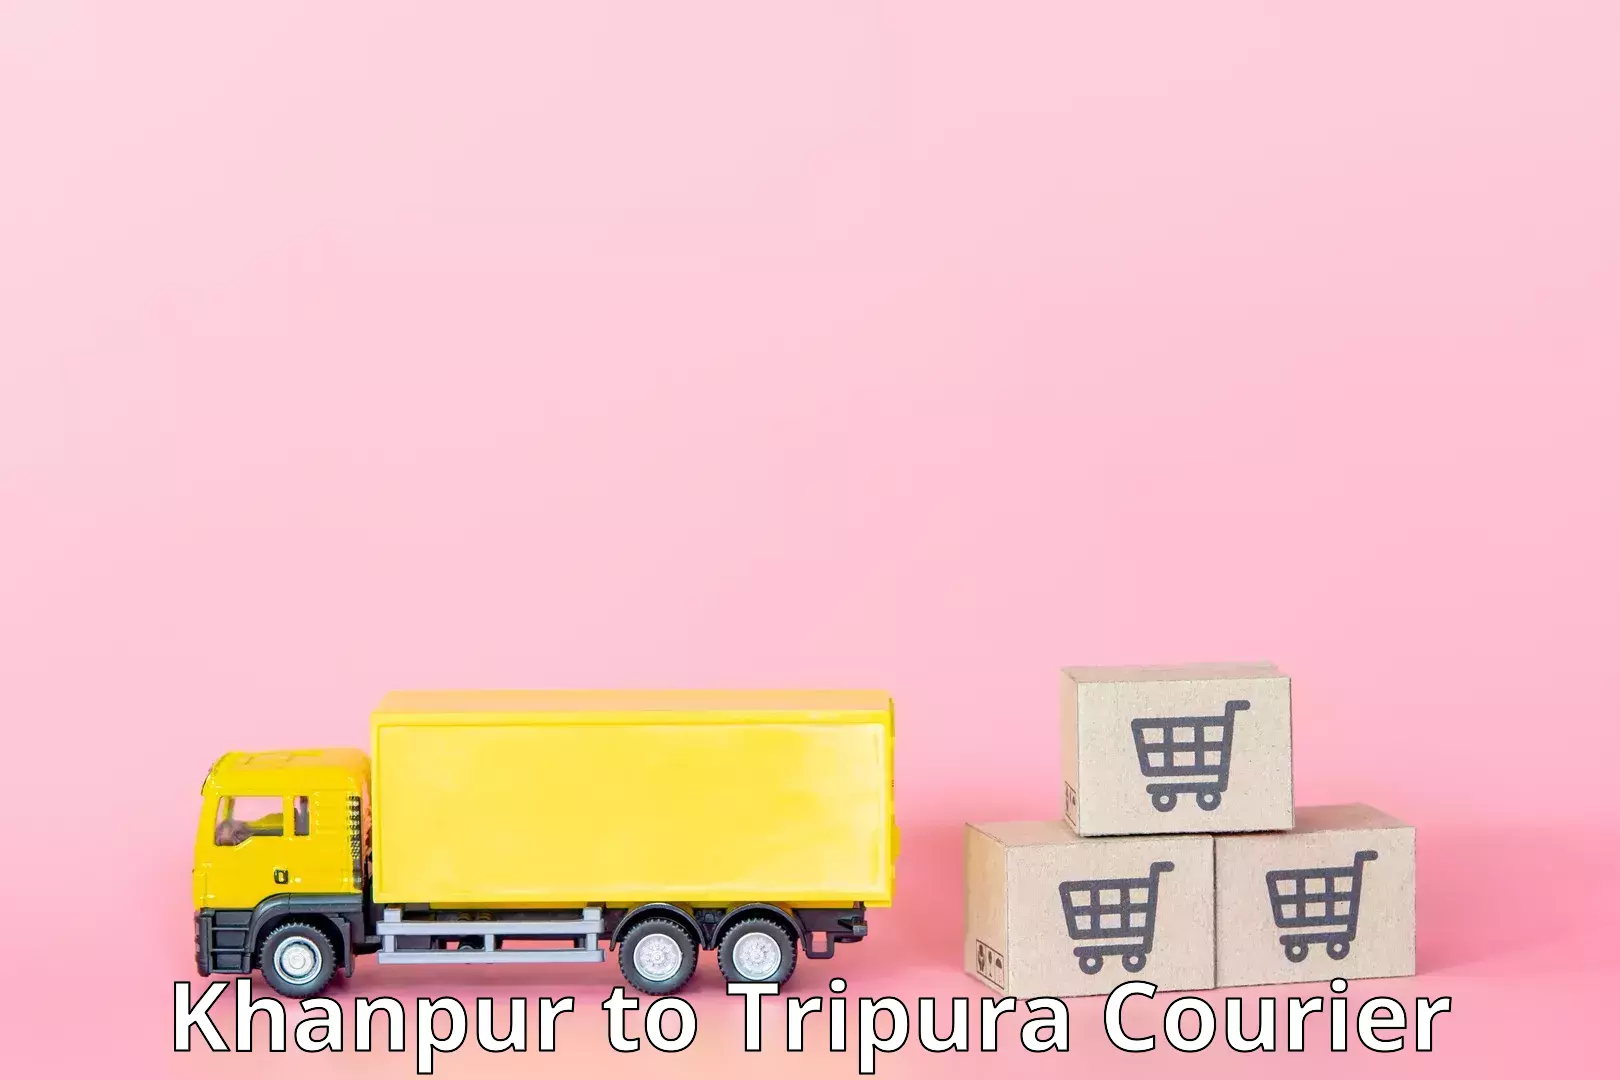 Efficient shipping operations Khanpur to Udaipur Tripura